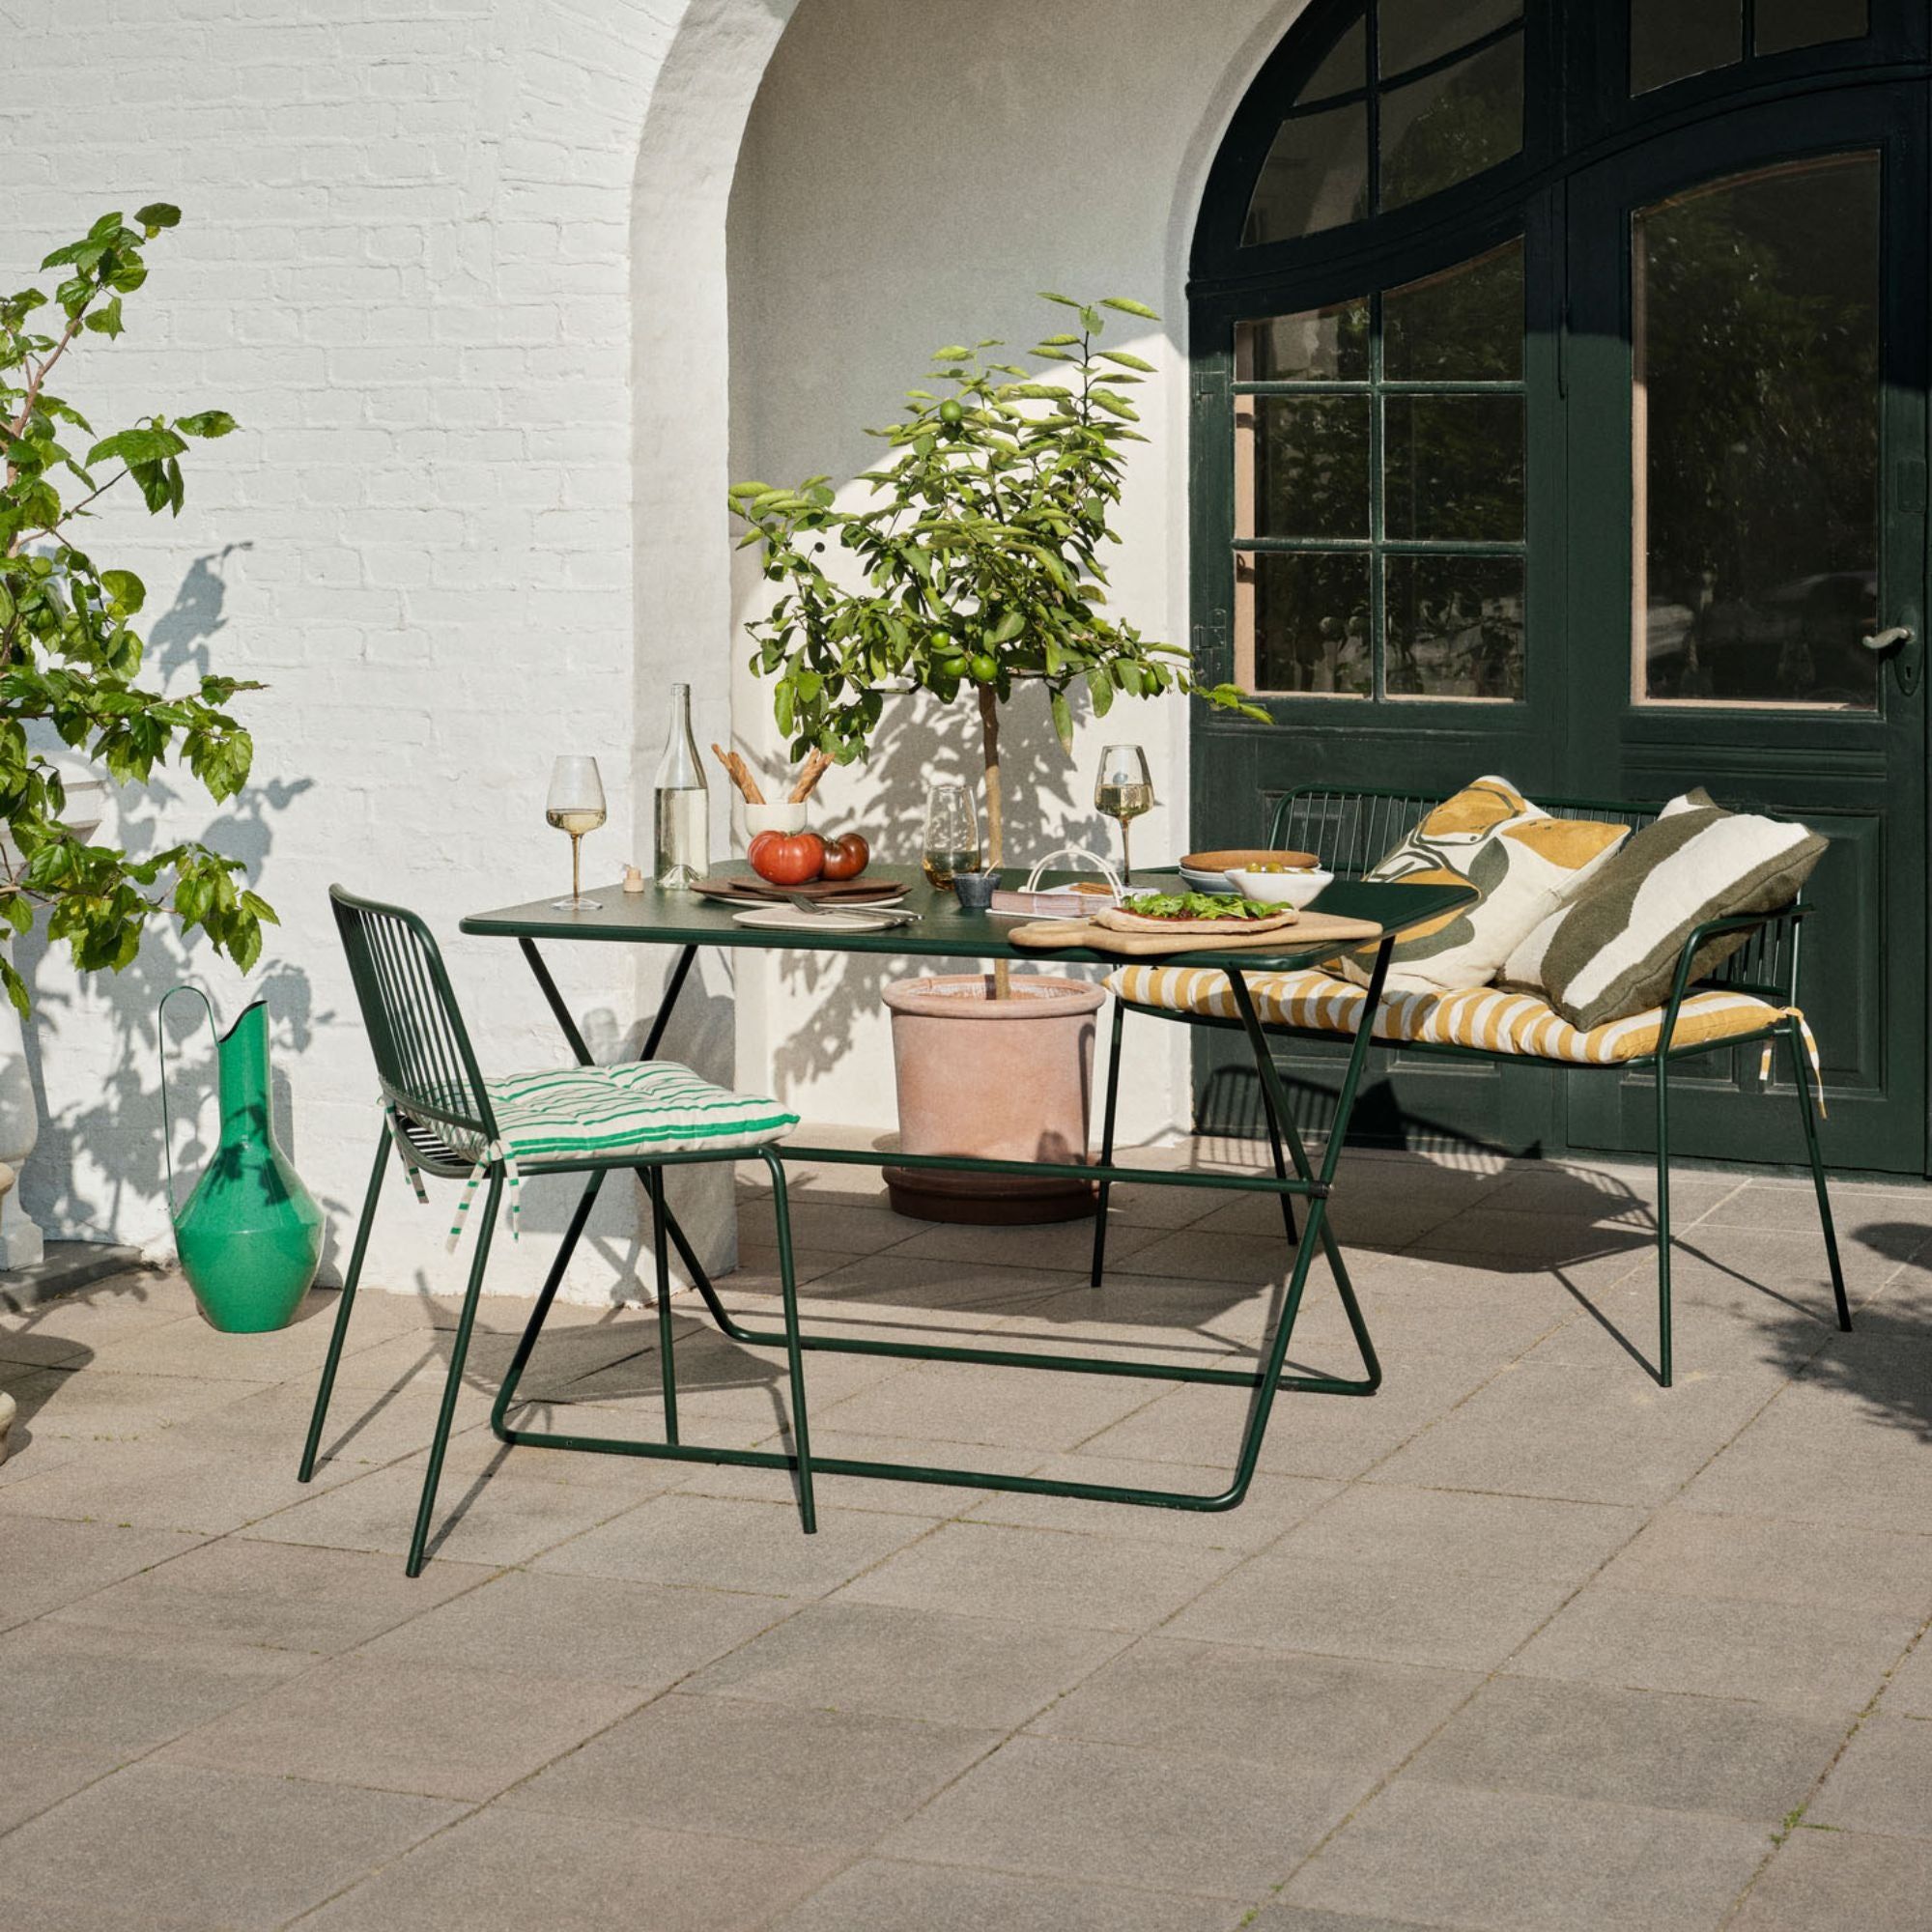 Enhance Your Outdoor Space with Stylish Garden Tables and Chairs